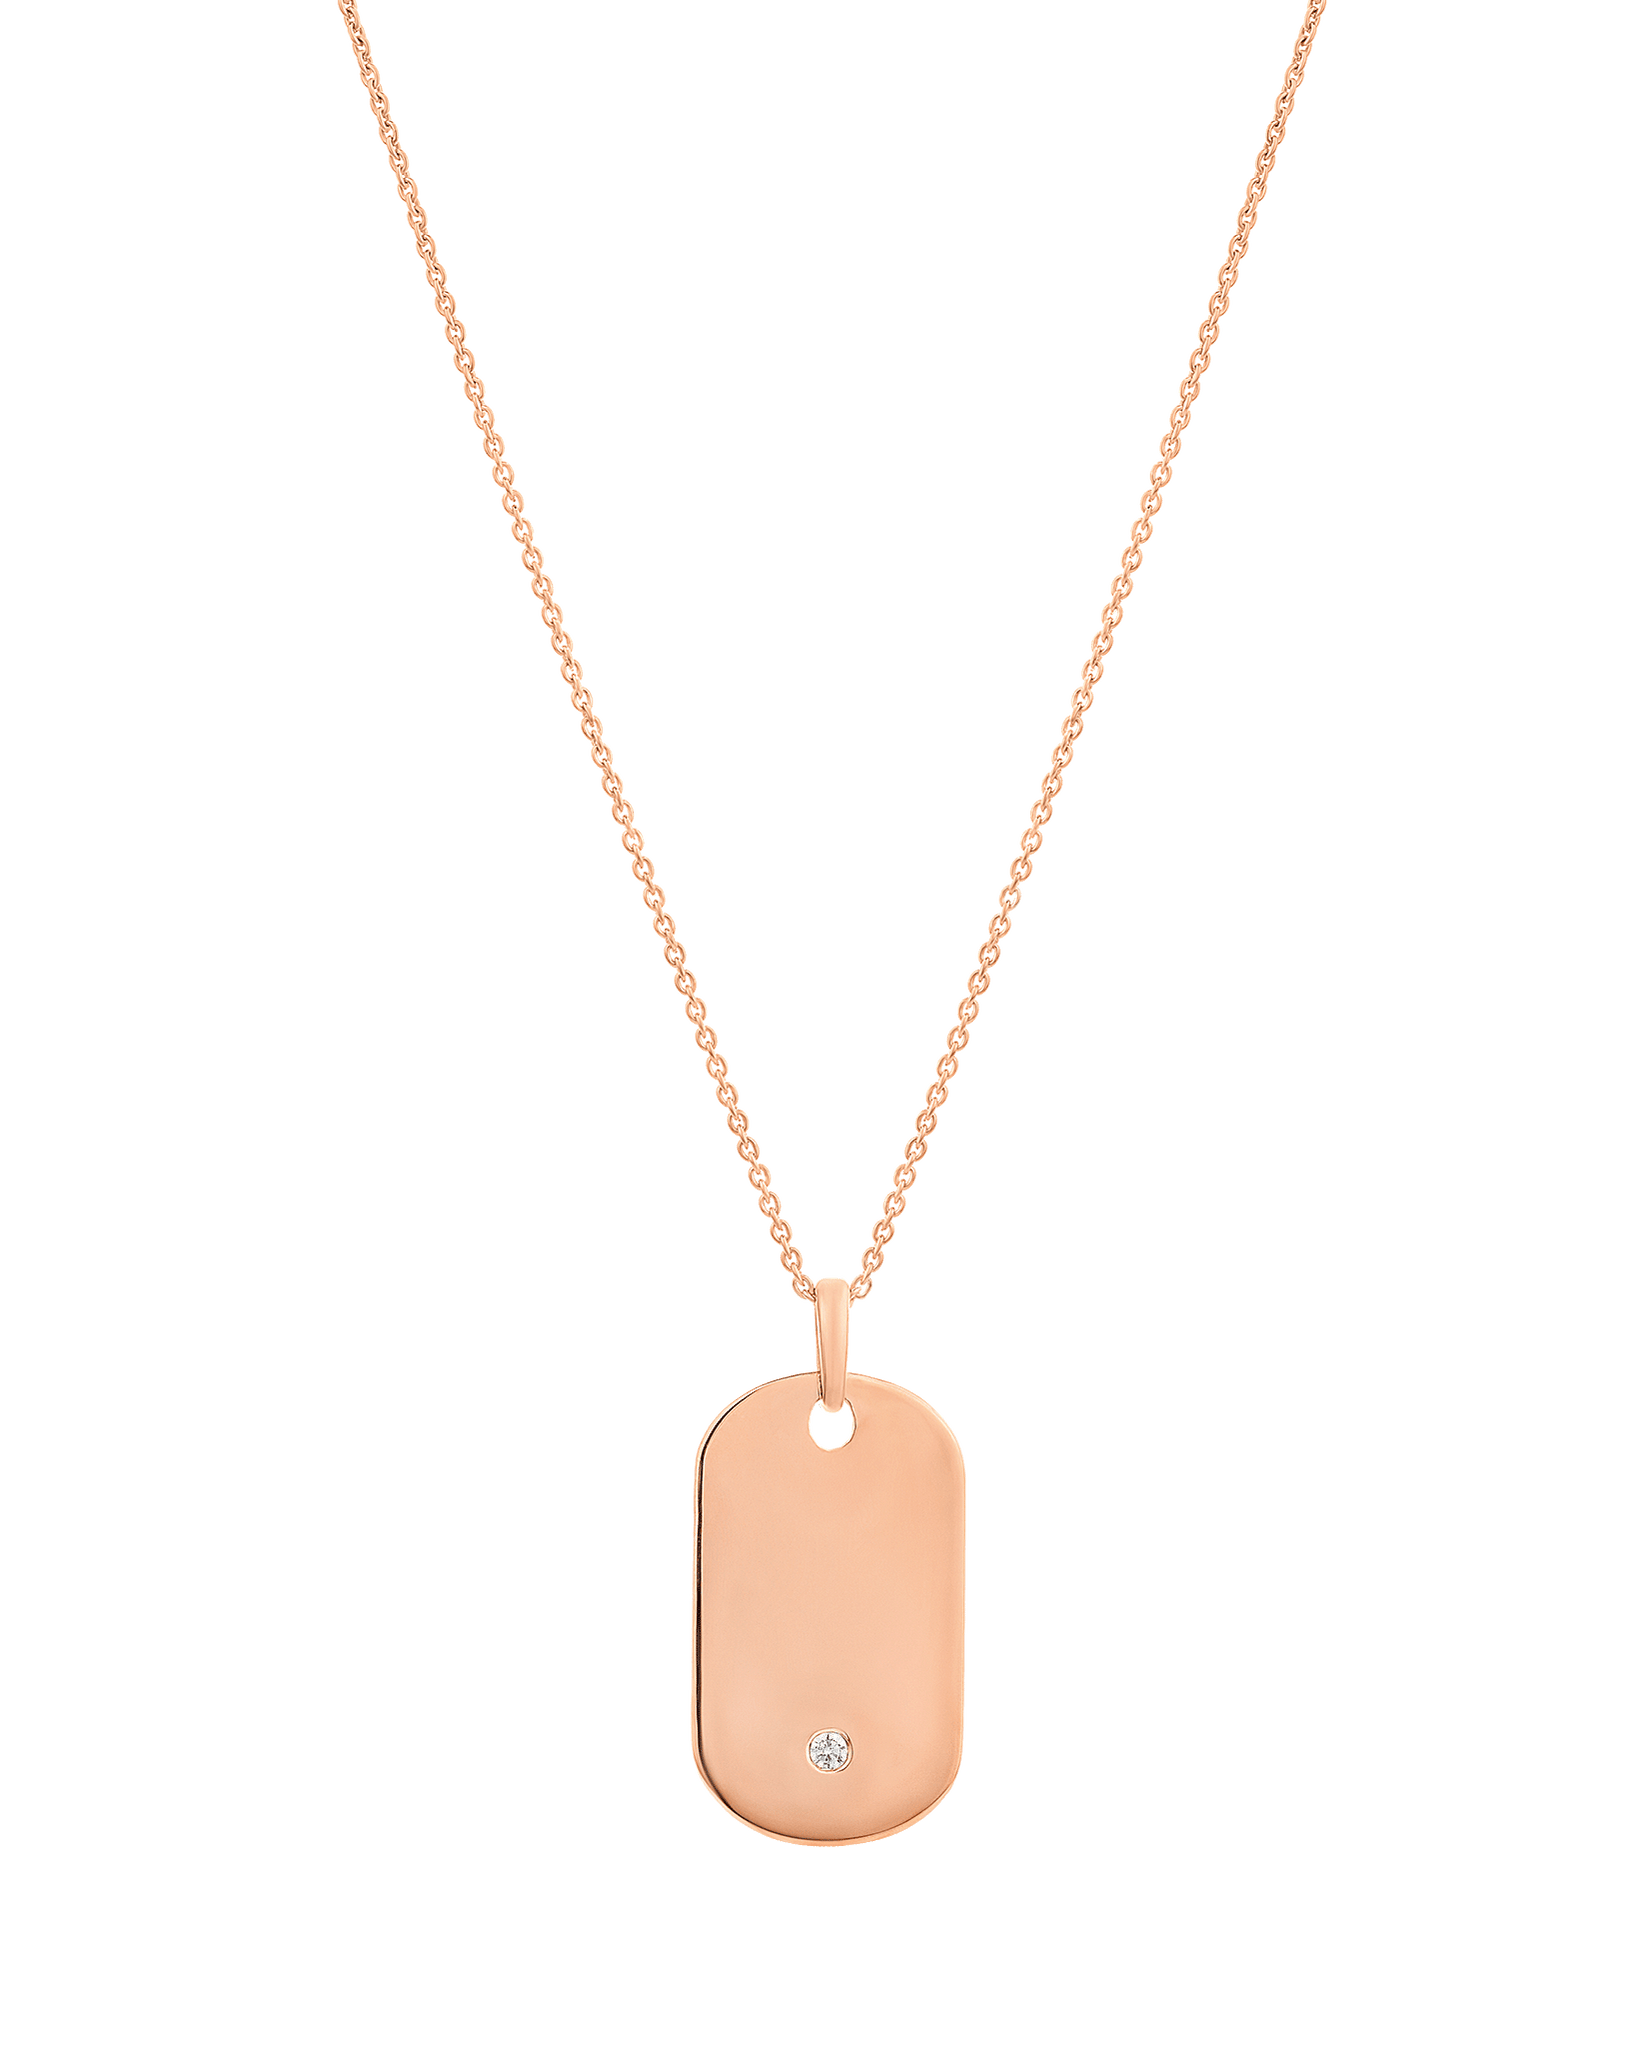 Single Diamond Plate - 14K Rose Gold Necklaces 14K Solid Gold 